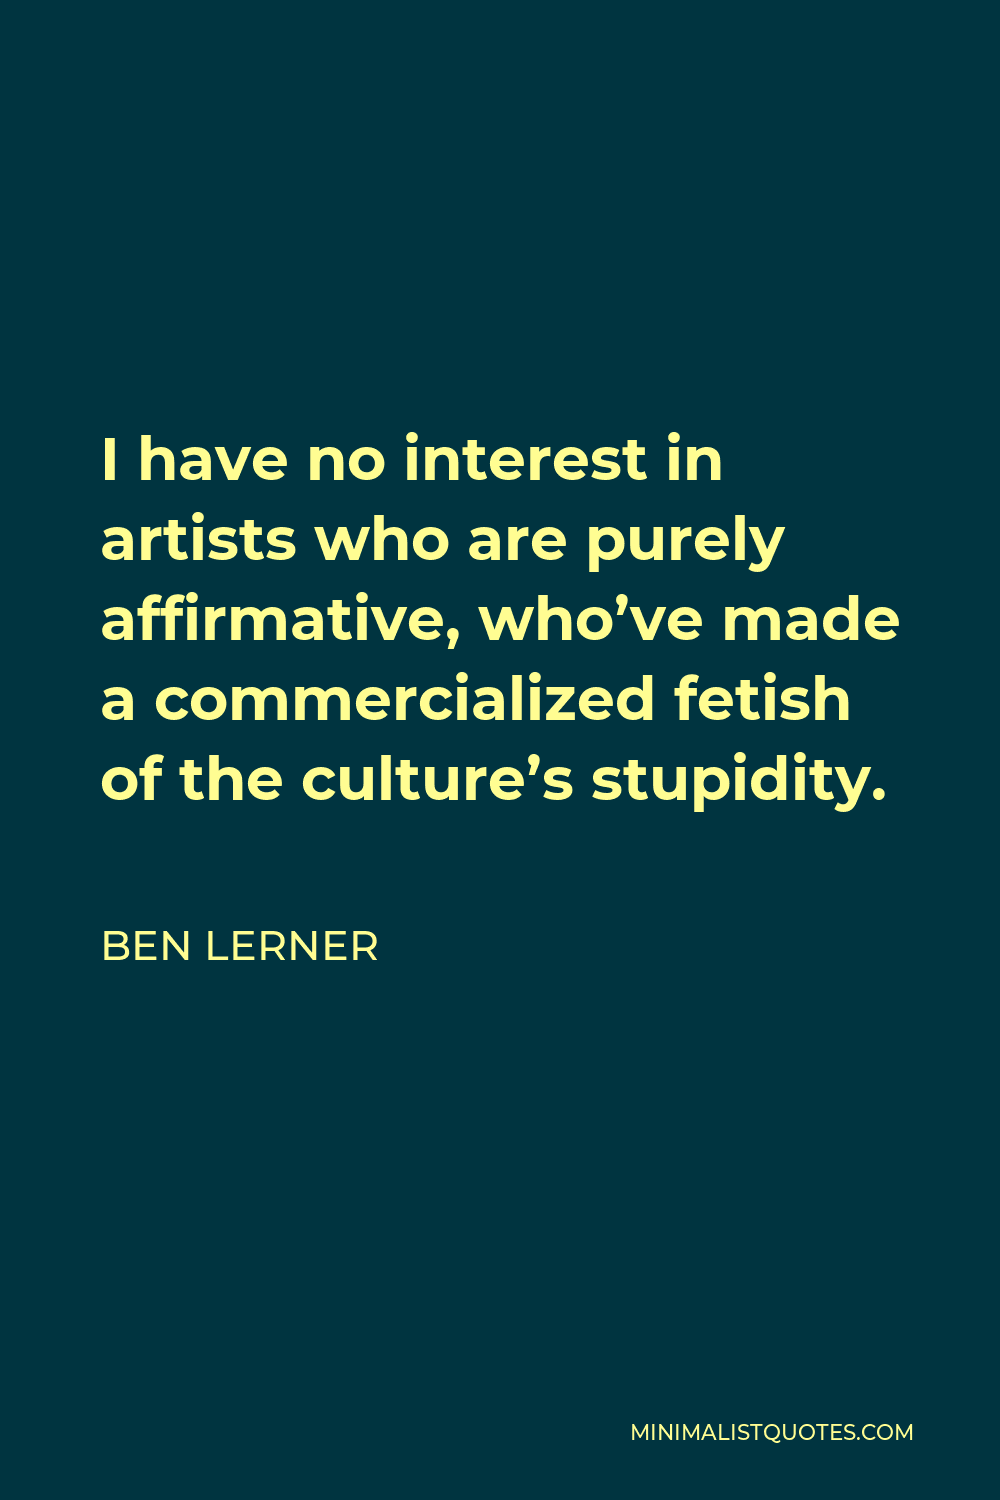 Ben Lerner Quote - I have no interest in artists who are purely affirmative, who’ve made a commercialized fetish of the culture’s stupidity.